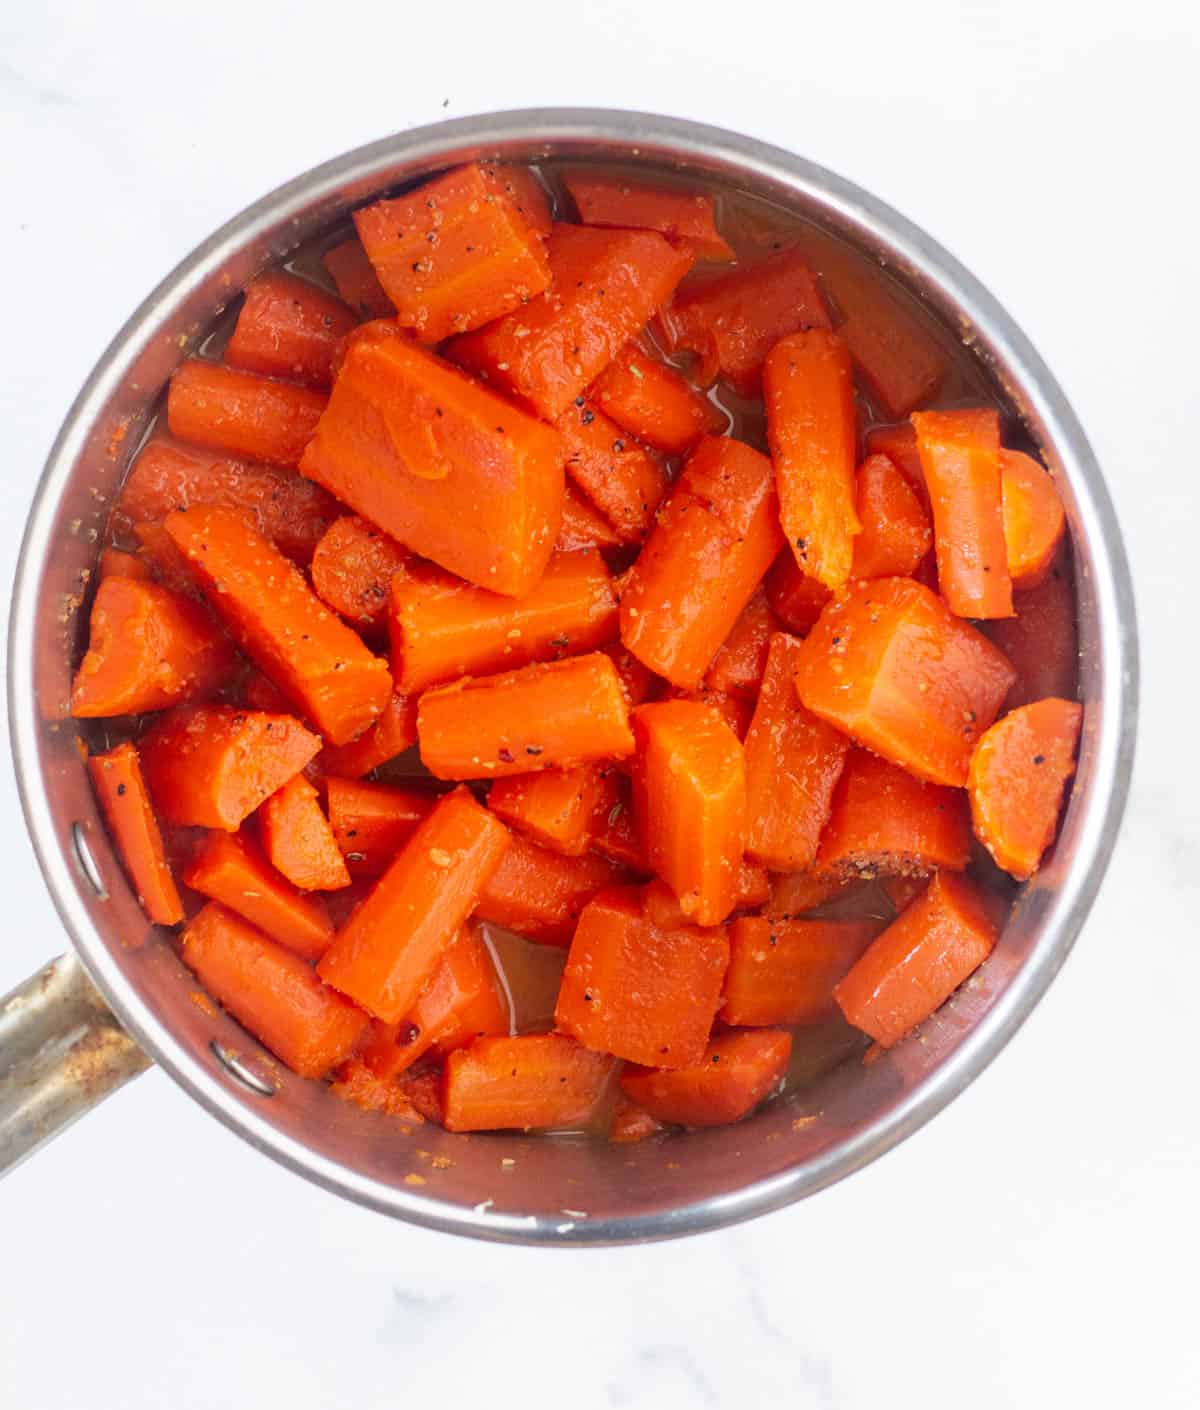 finished carrots in pot